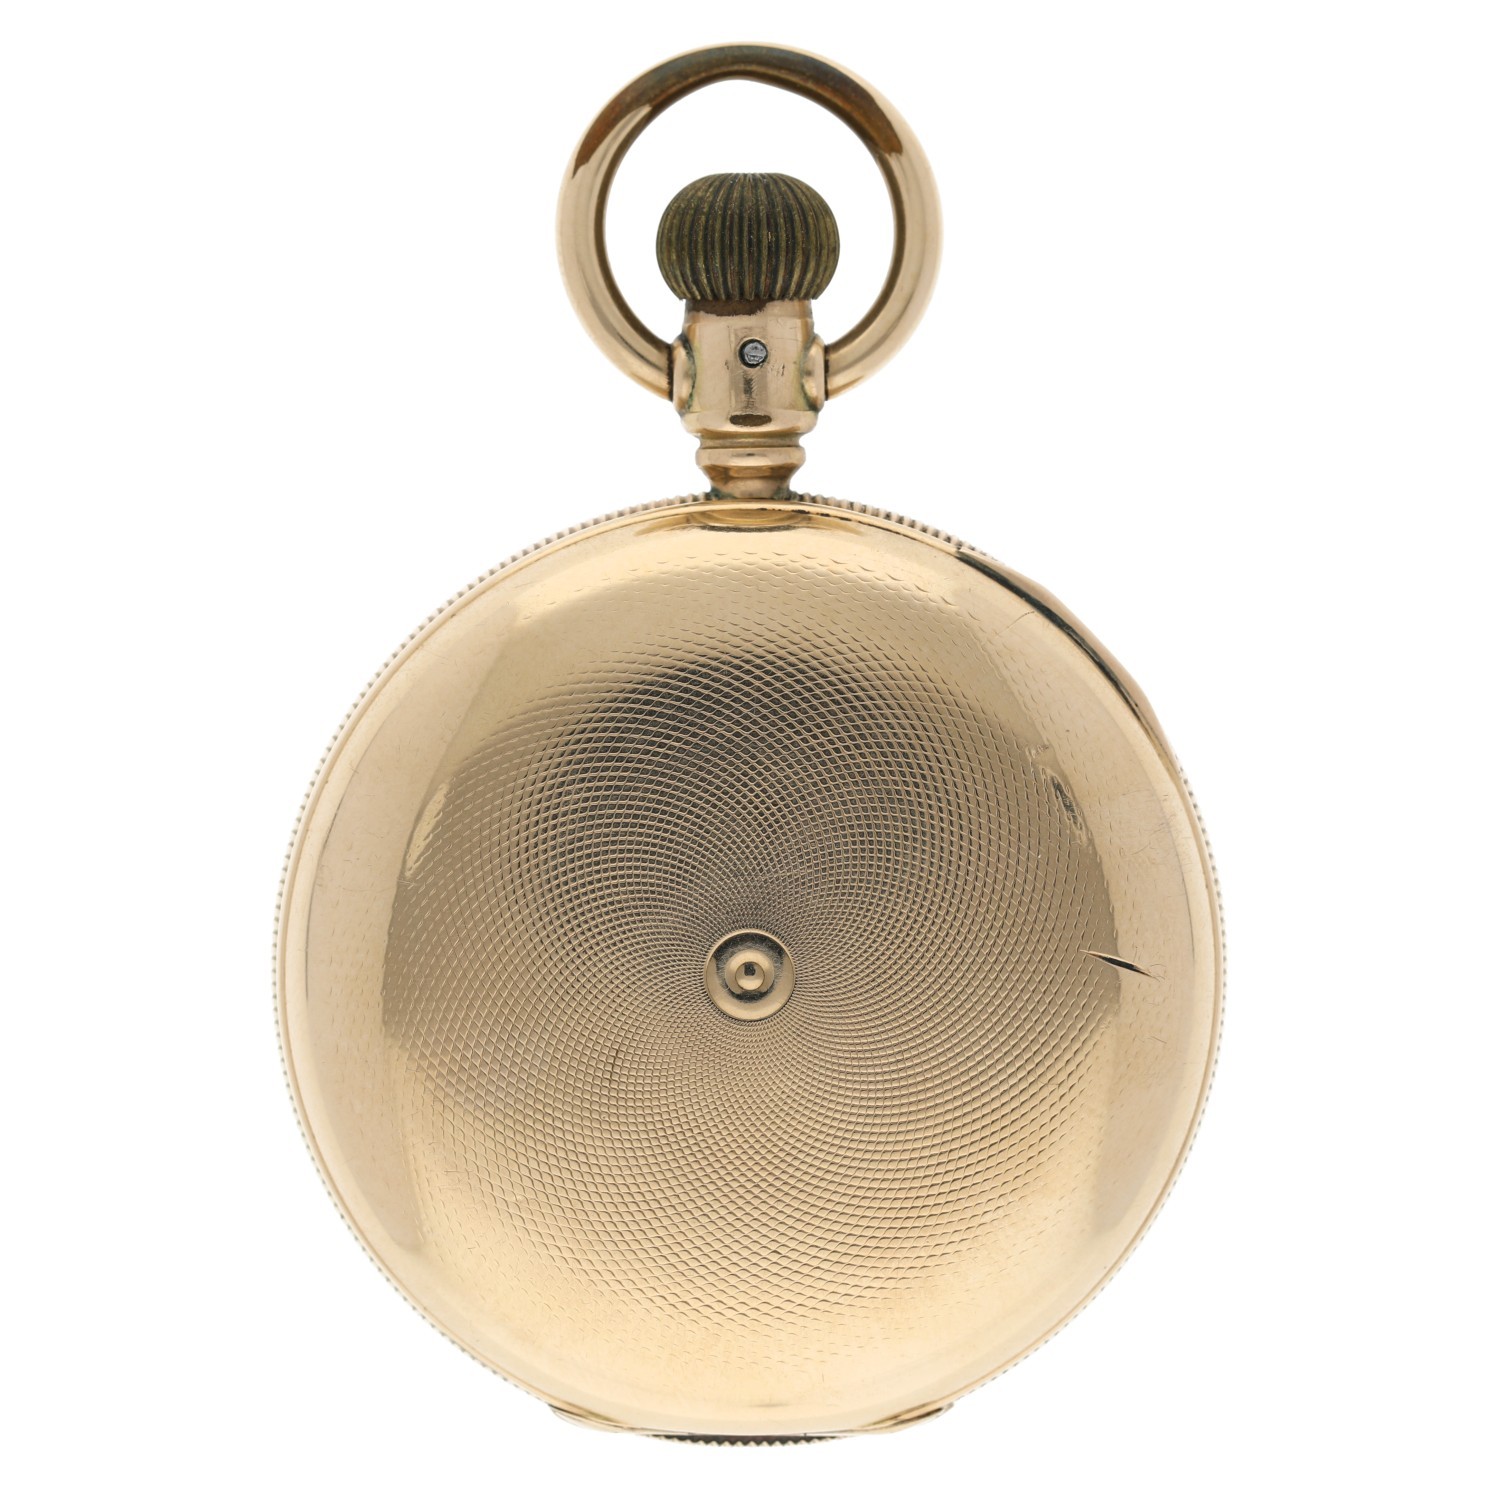 Elgin National Watch Co. centre seconds gold plated lever set hunter pocket watch, circa 1881, - Image 5 of 5